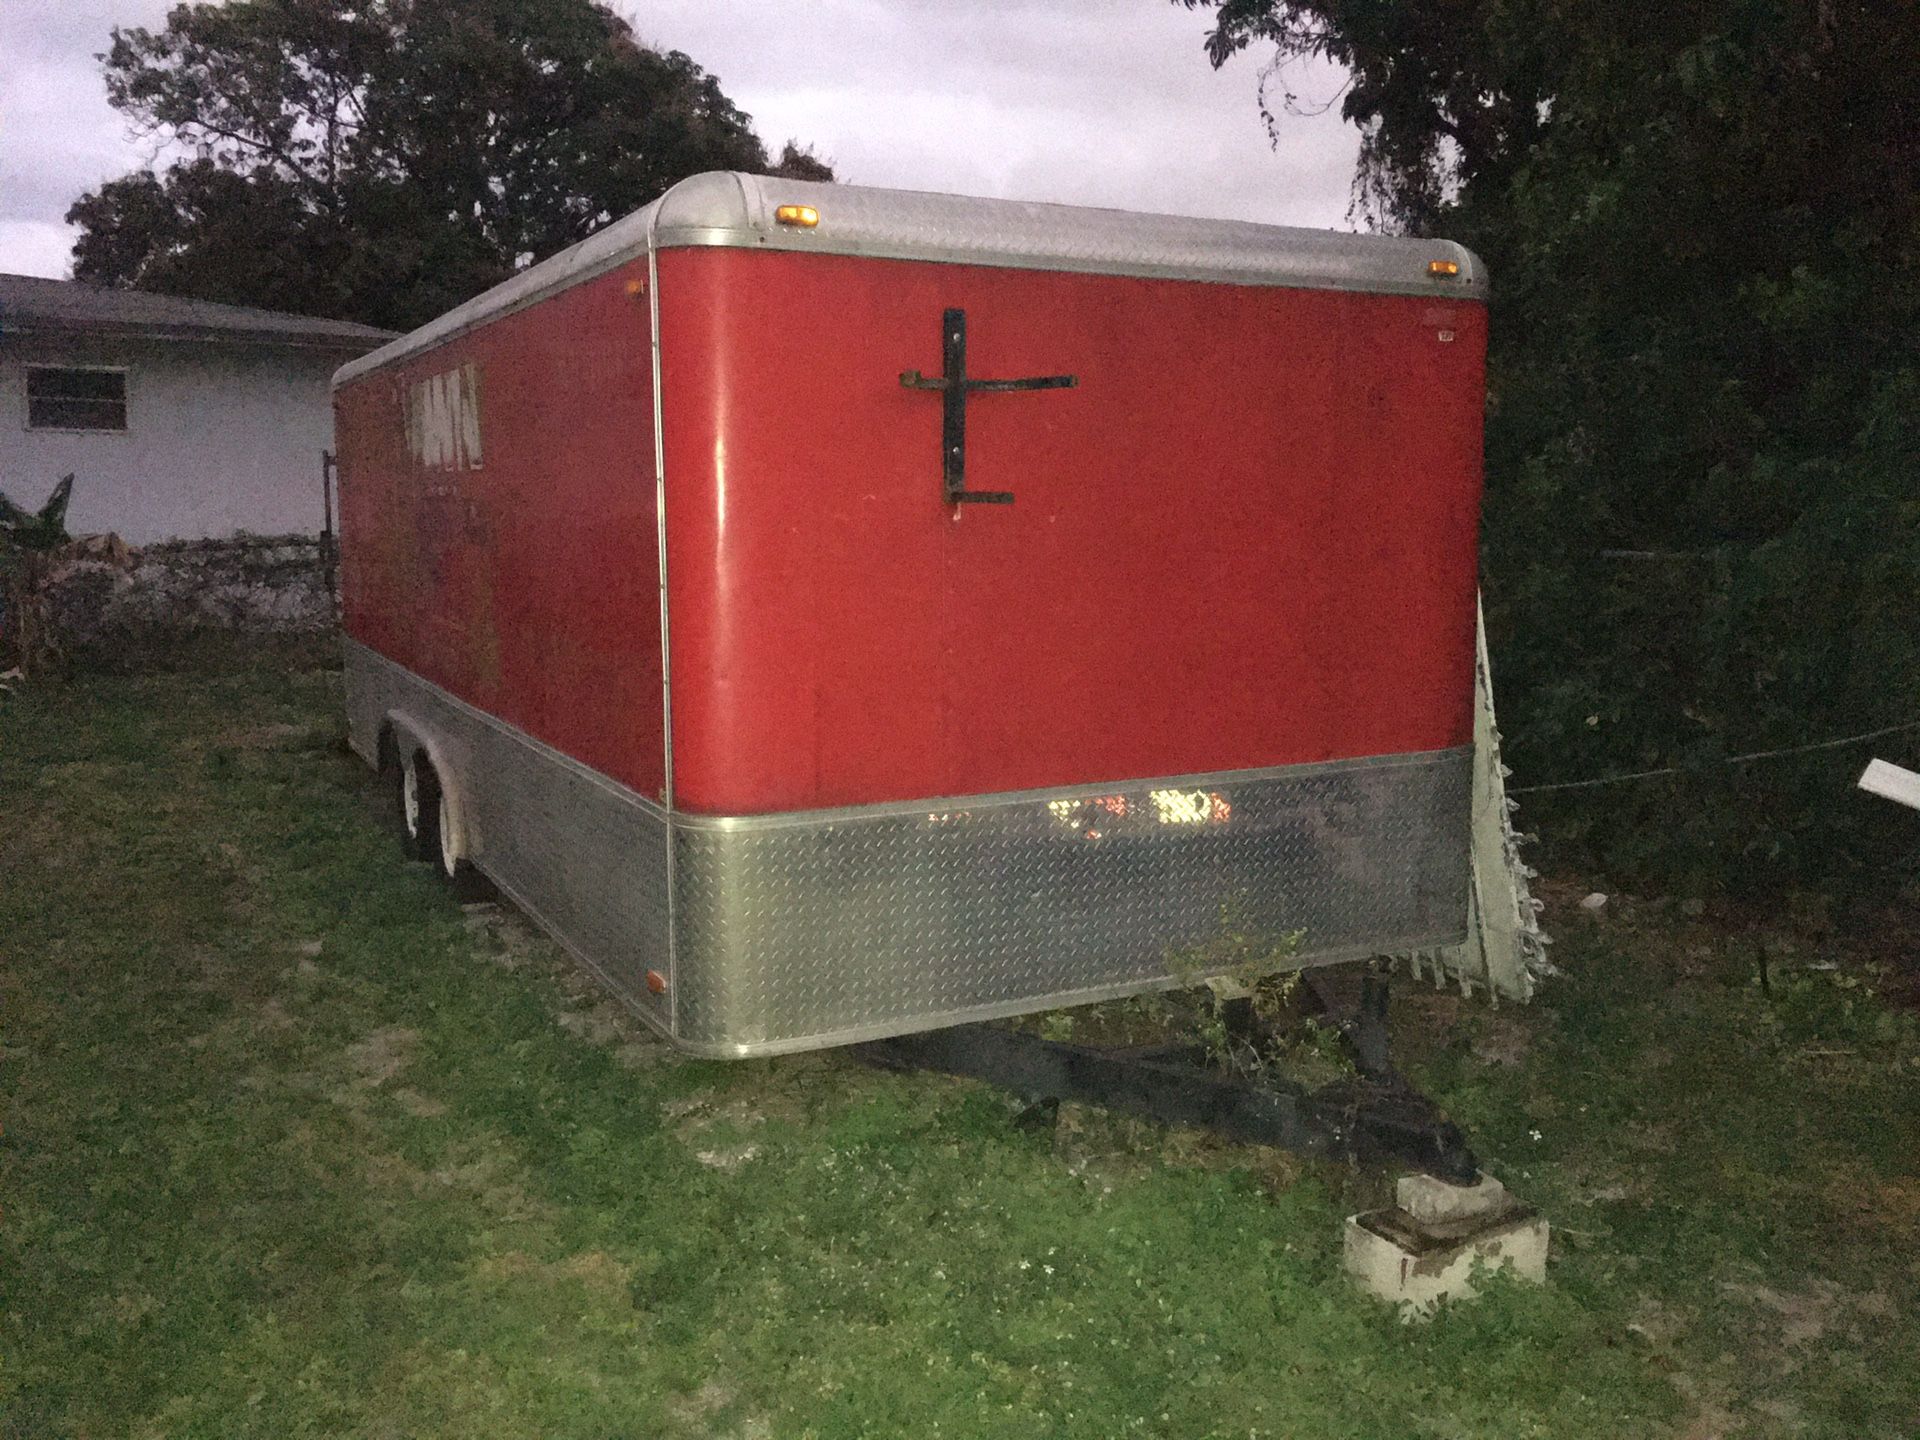 Enclose trailer 8.5 wide by 20 long SELL OR TRADE